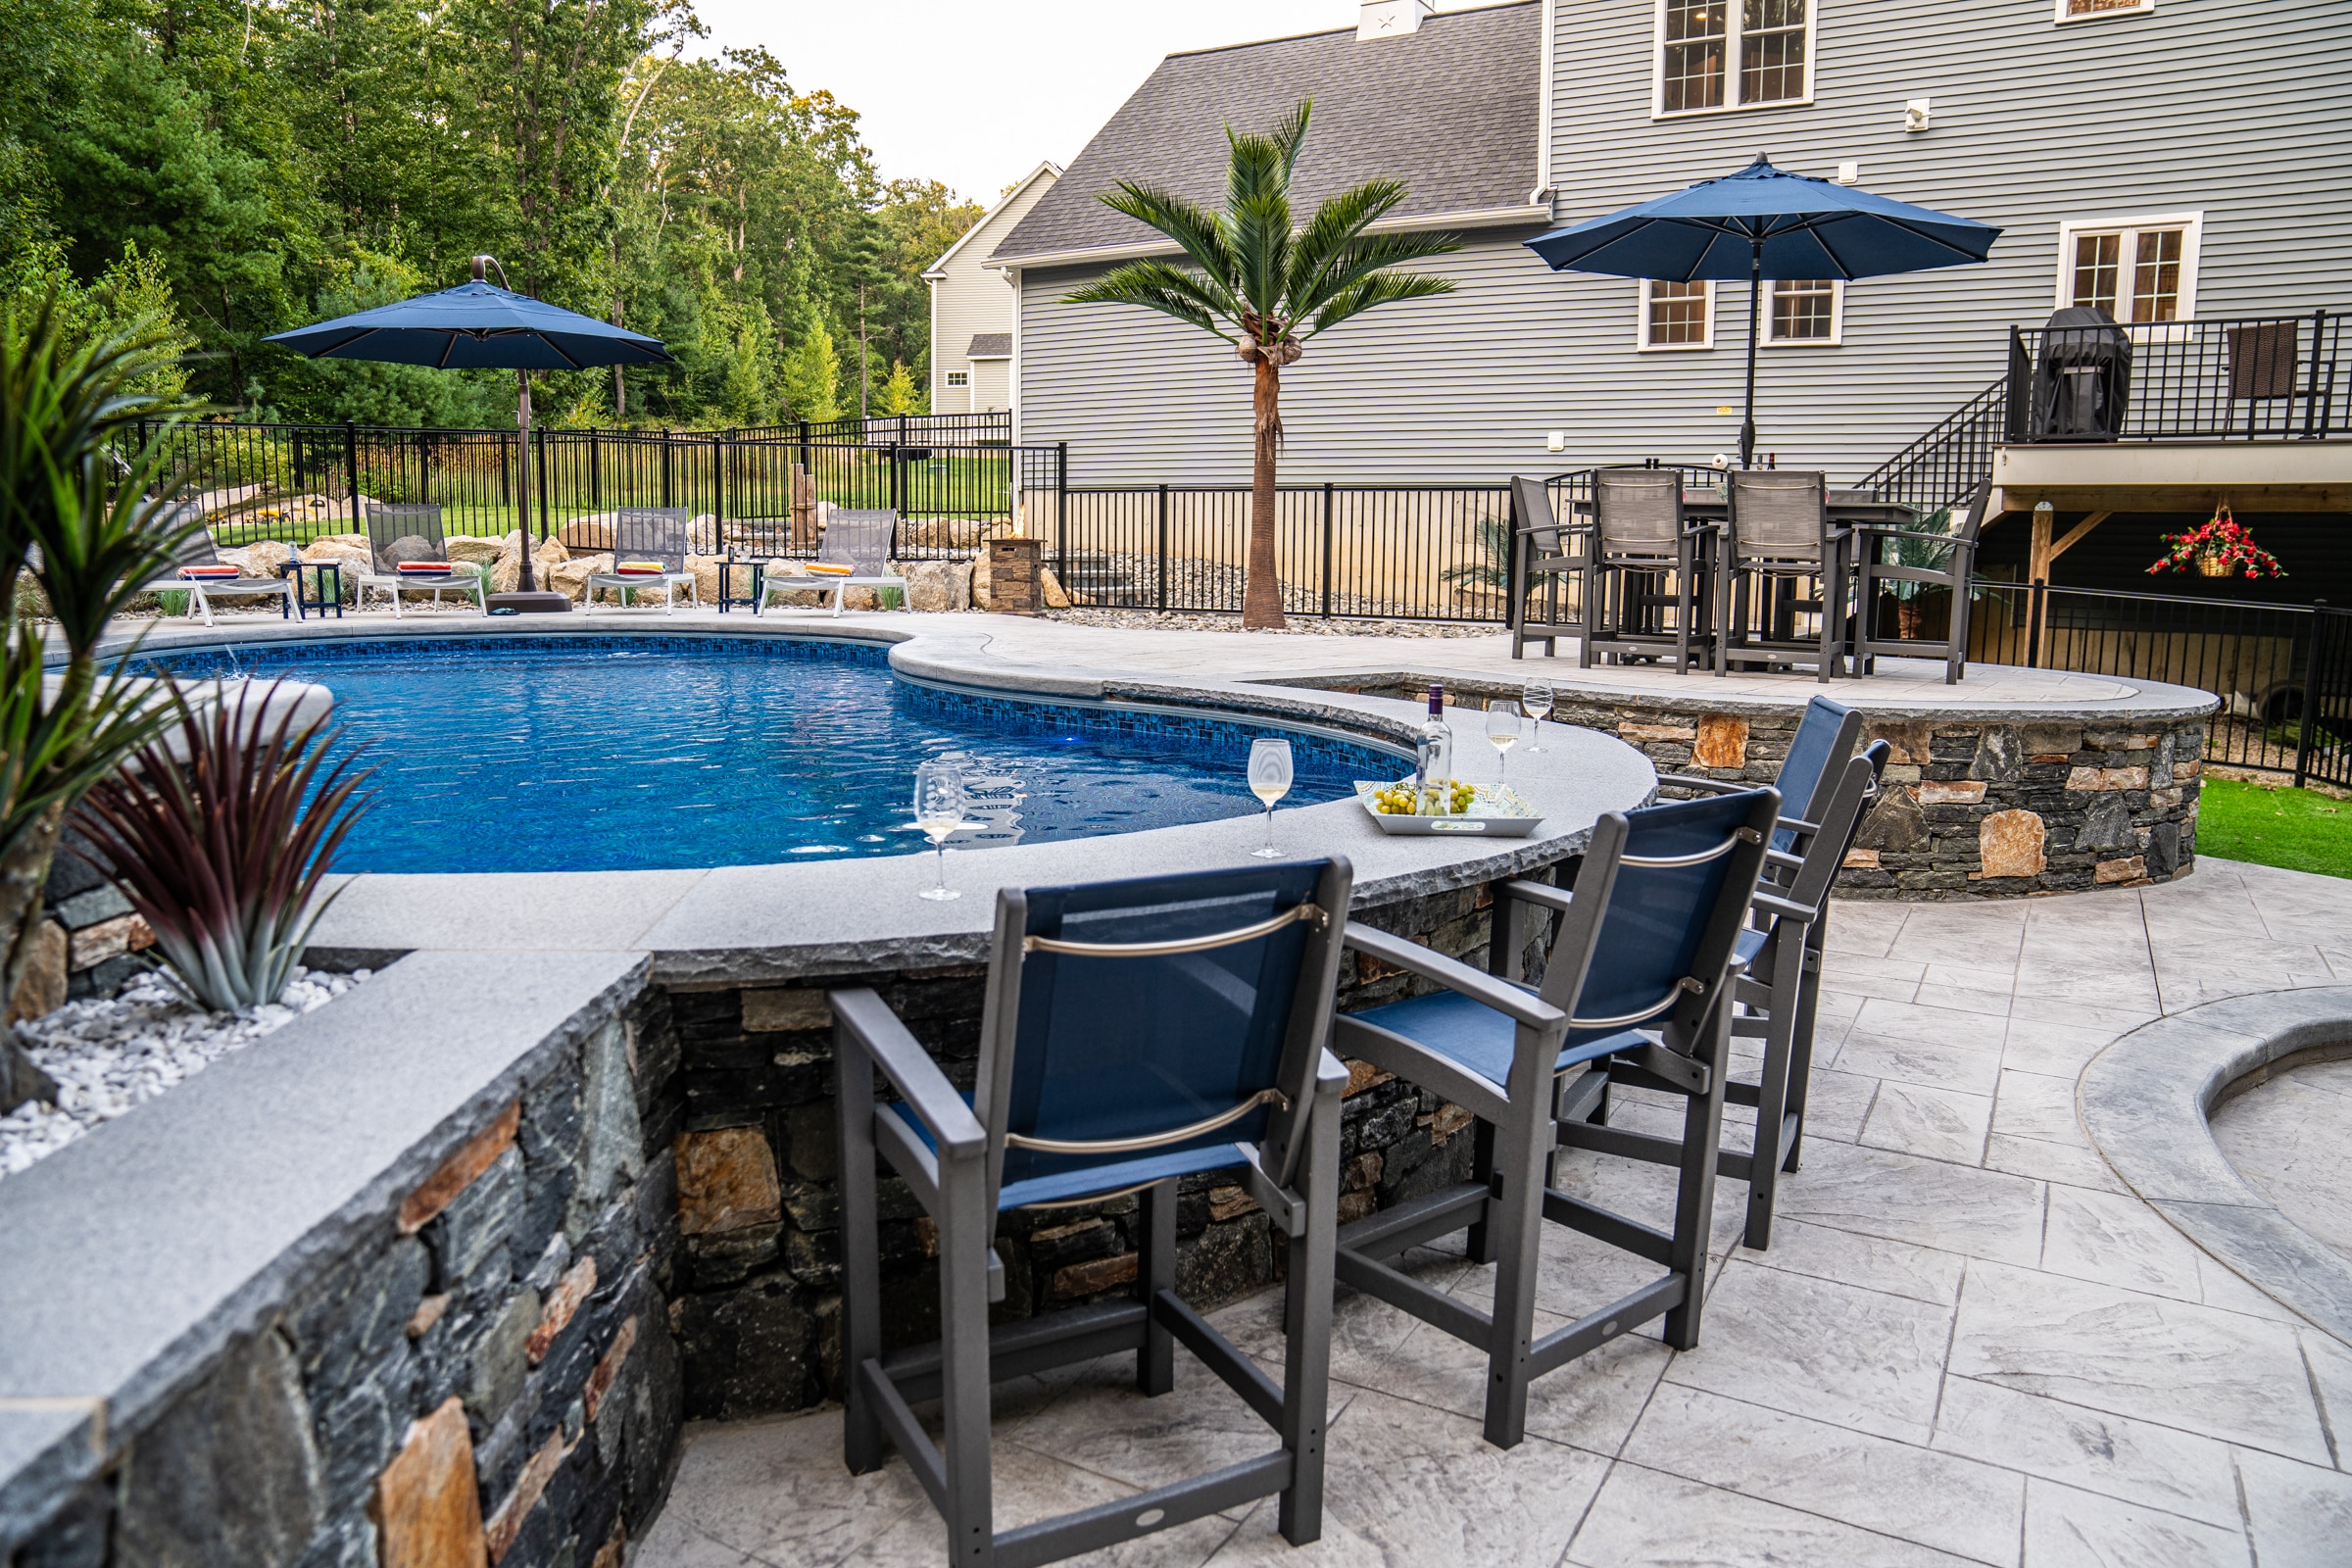 Our clients in Northbridge, Massachusetts can enjoy drinks and food by the pool with this poolside bar built by Dex by Terra.